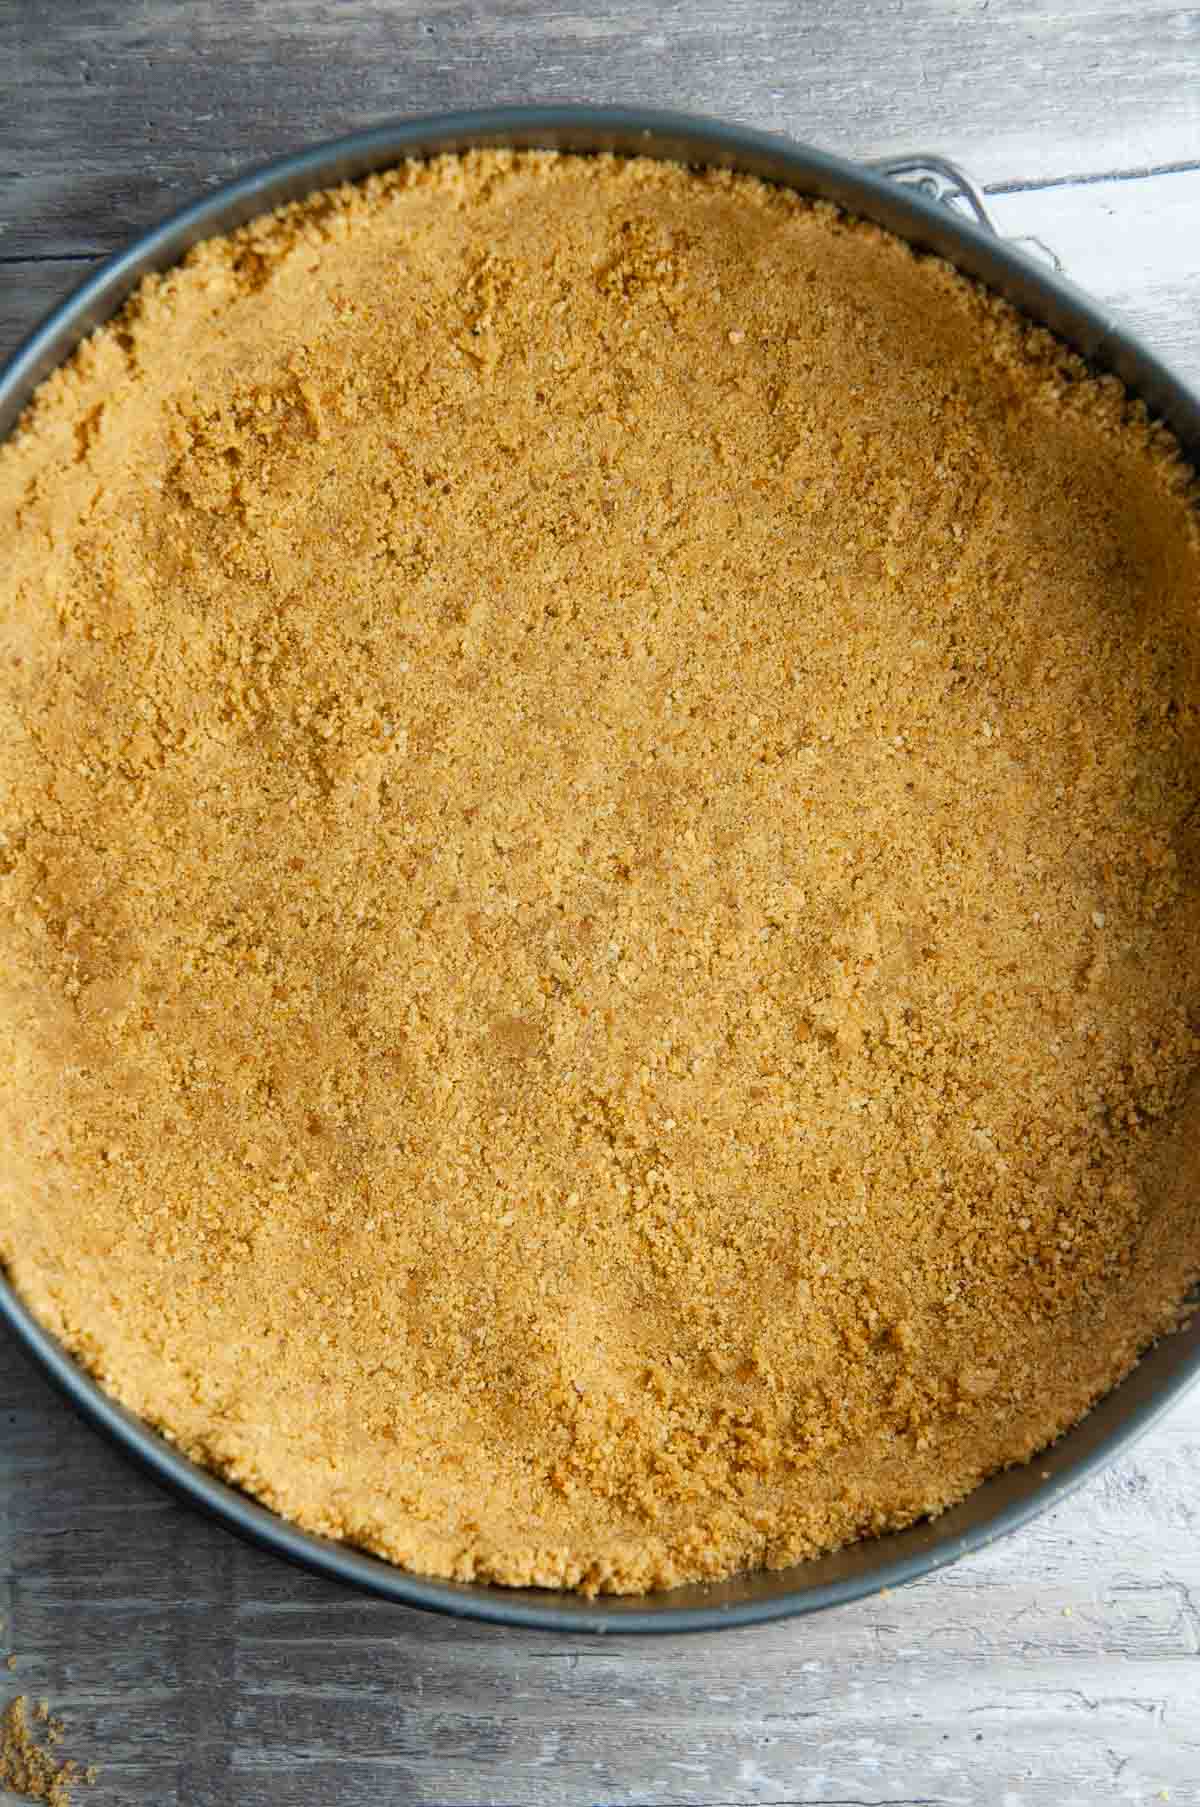 Graham cracker crust ready to chill or bake